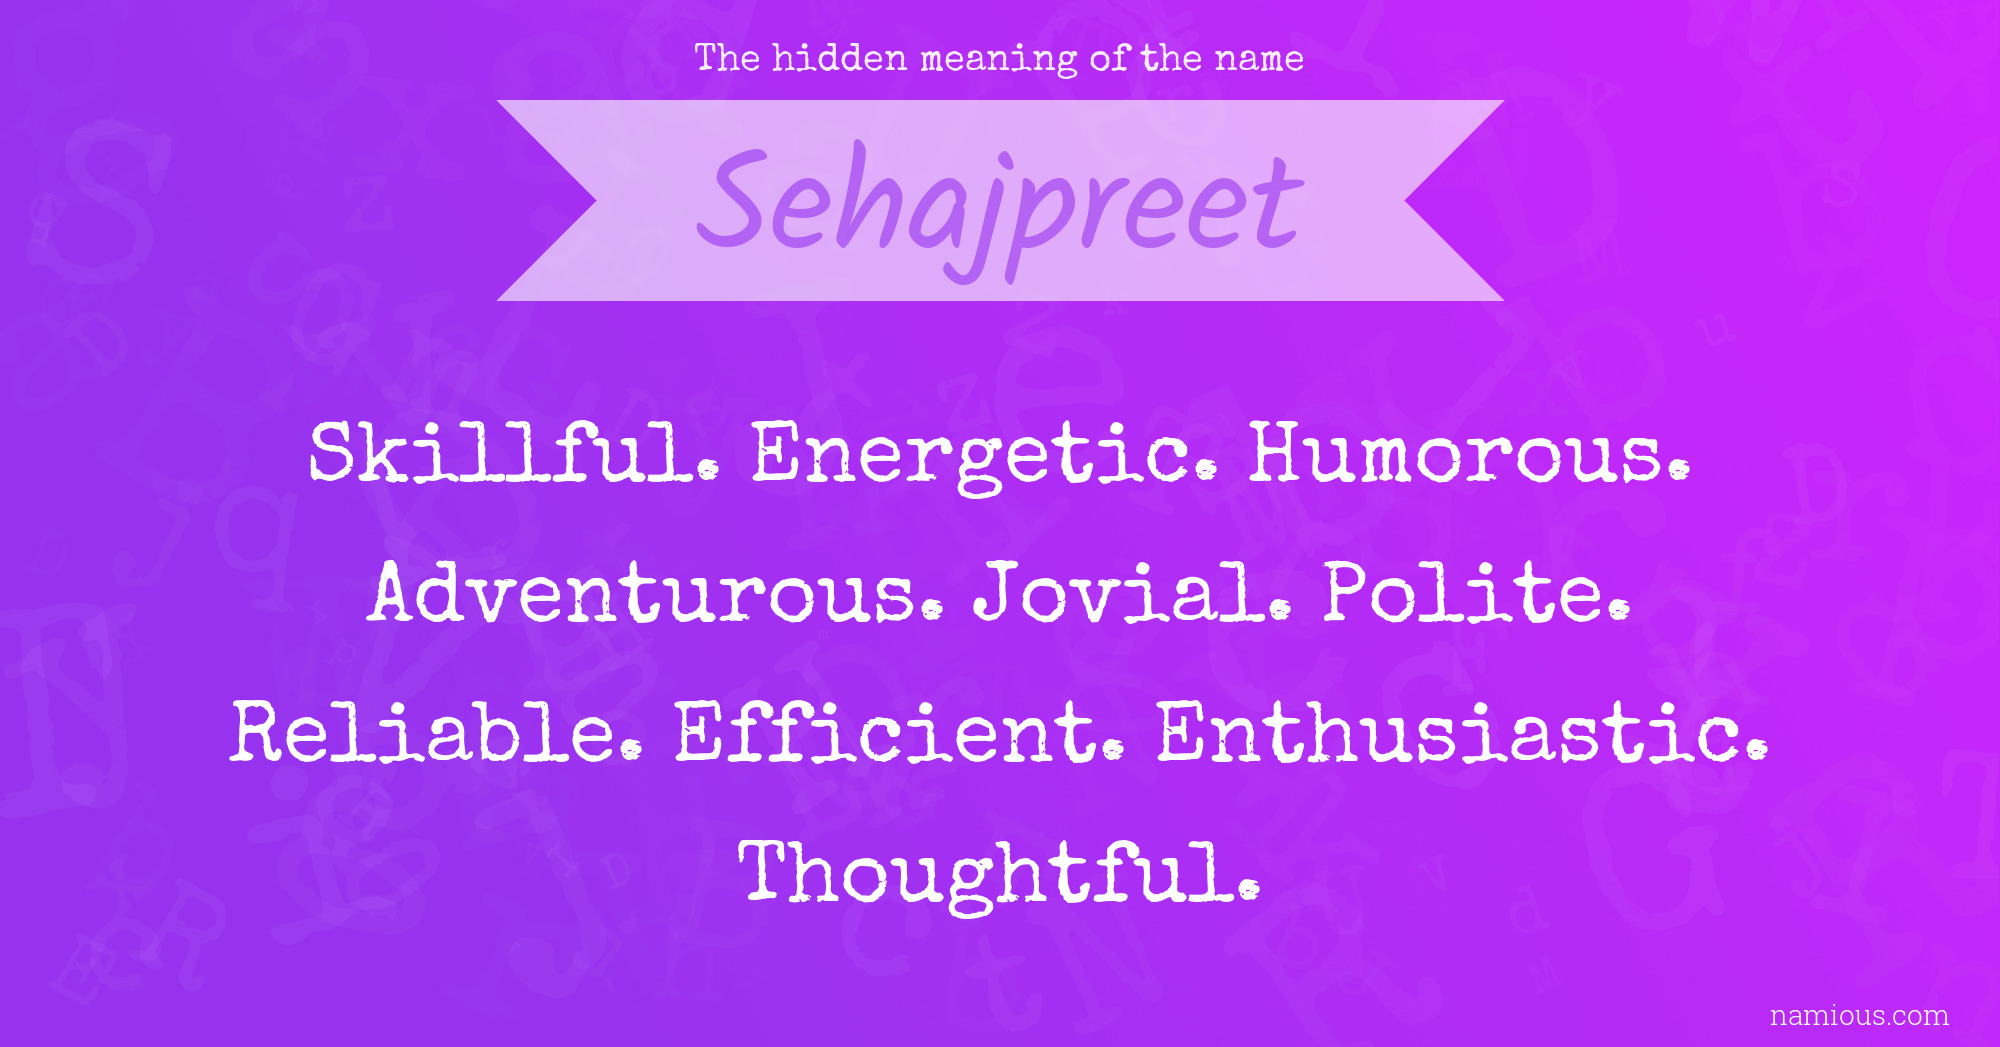 The hidden meaning of the name Sehajpreet